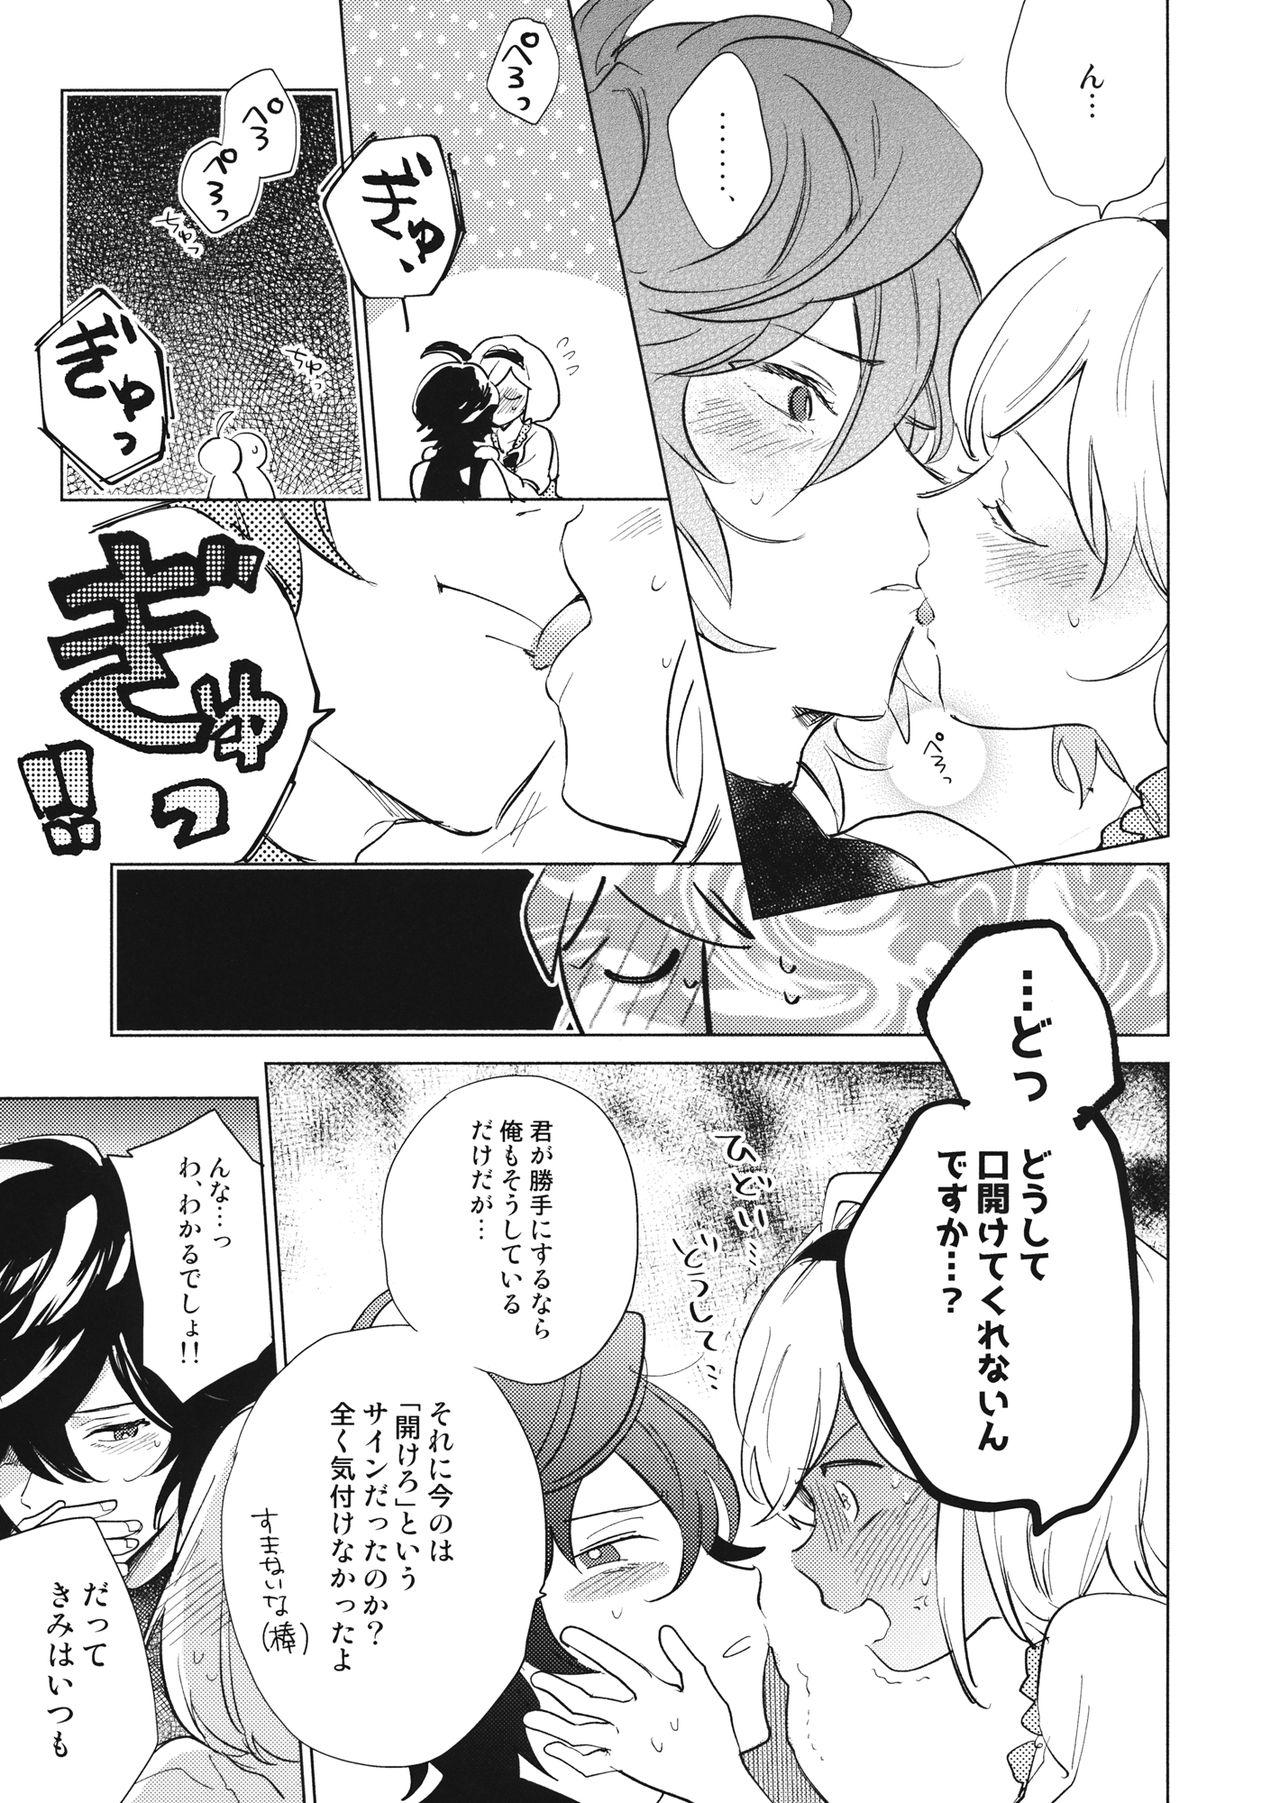 Caliente 災い転じて熱となれ - Granblue fantasy Ginger - Page 12